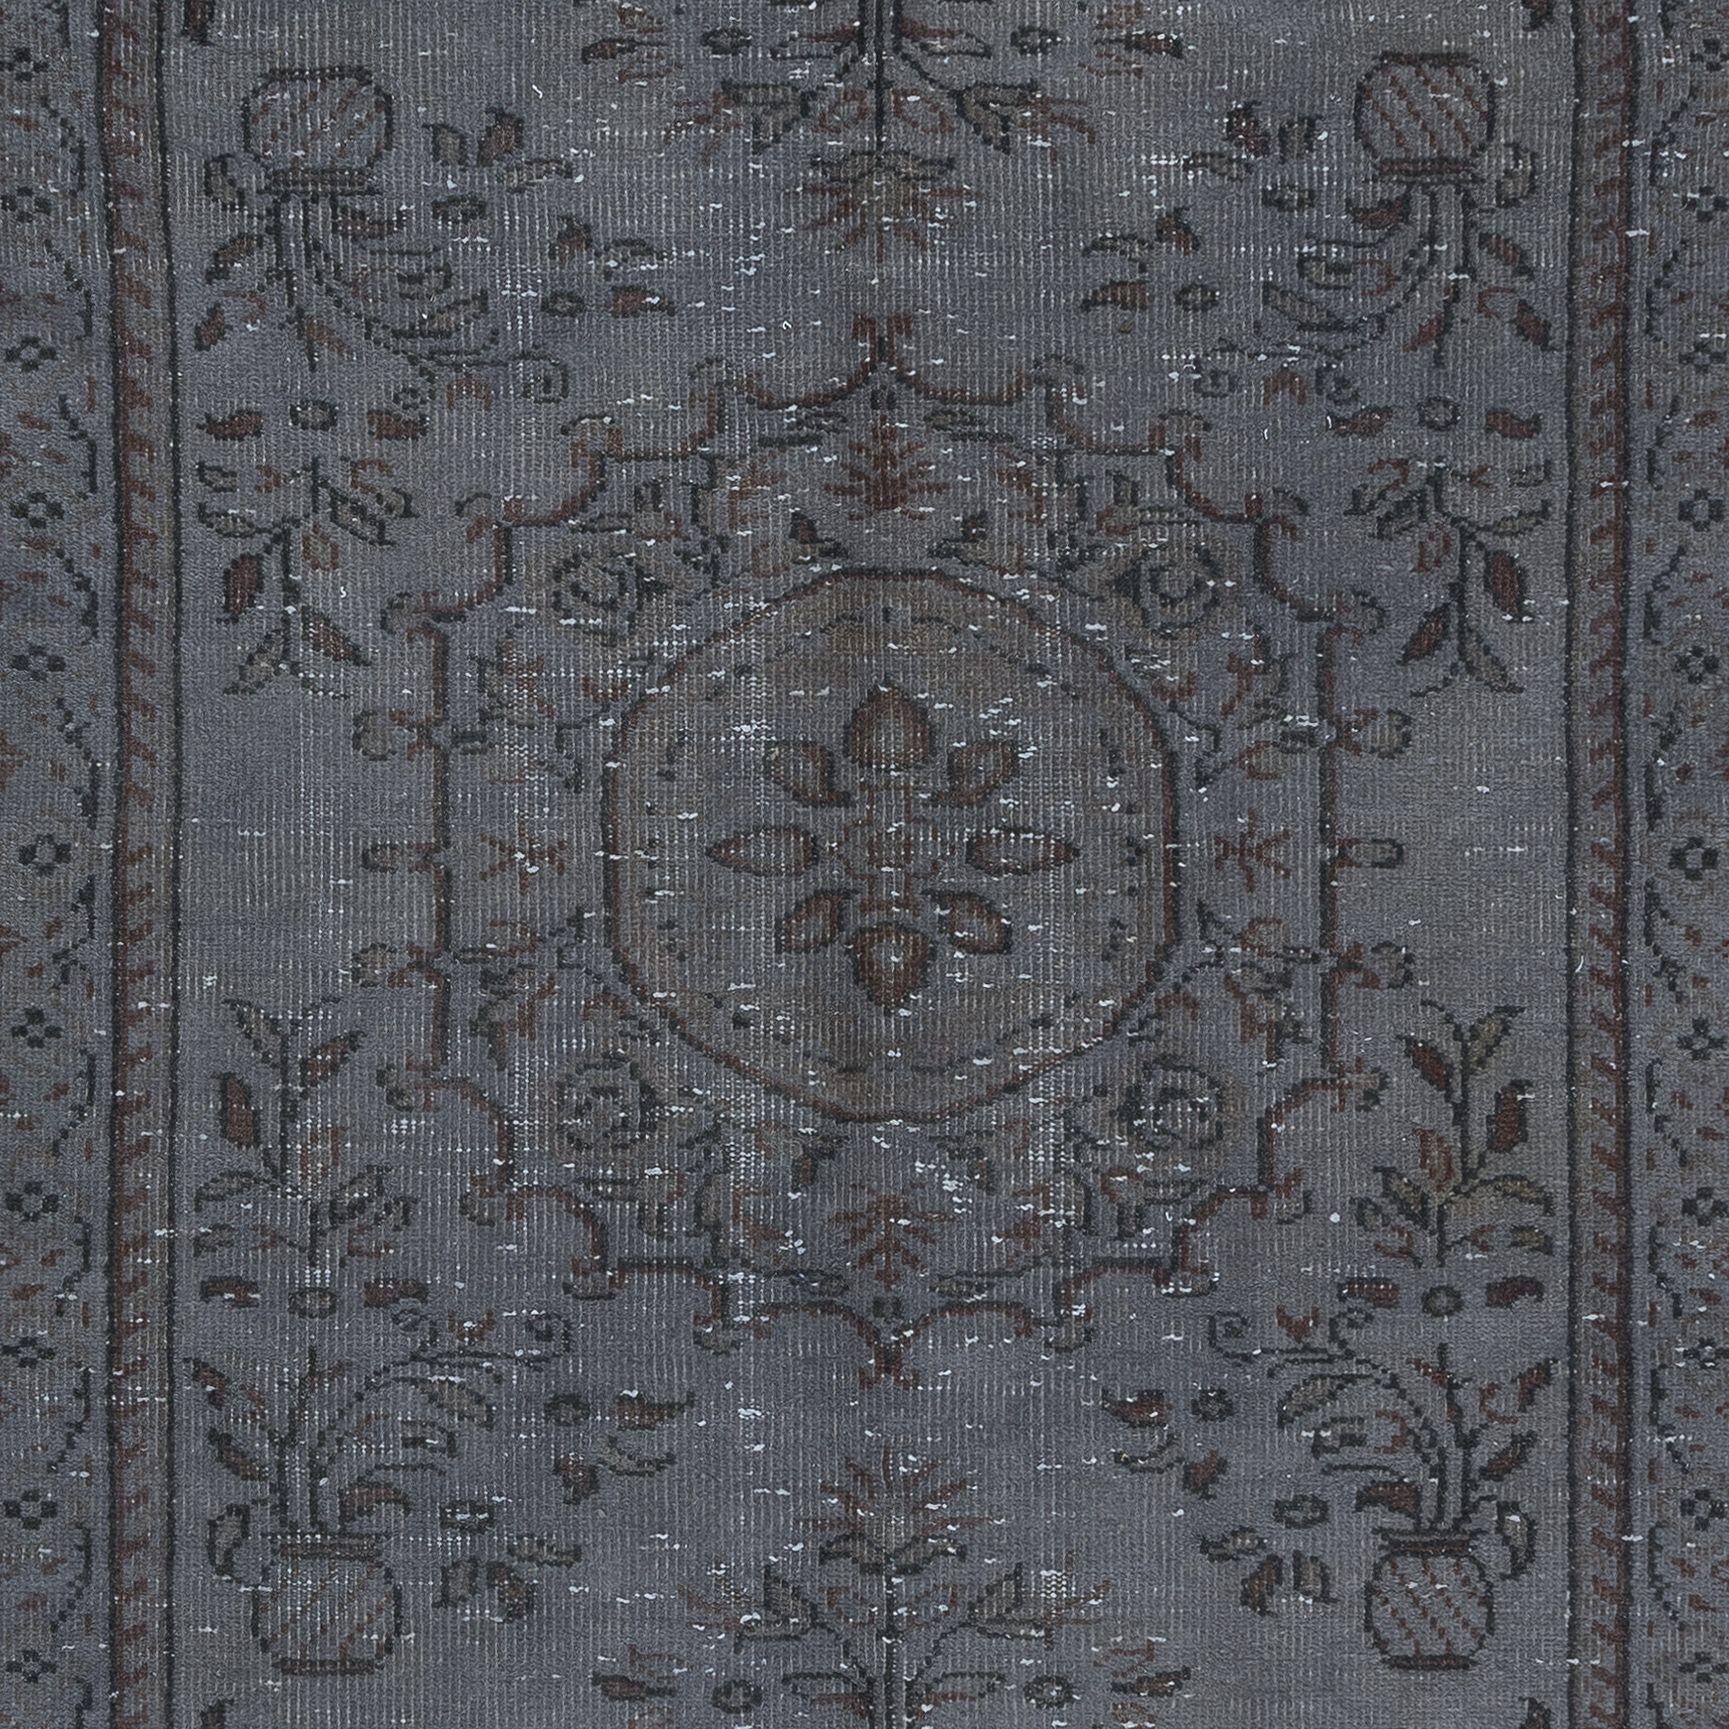 5.2x8.8 Ft Contemporary Handmade Turkish Wool Area Rug in Grey & Brown Tones In Good Condition For Sale In Philadelphia, PA